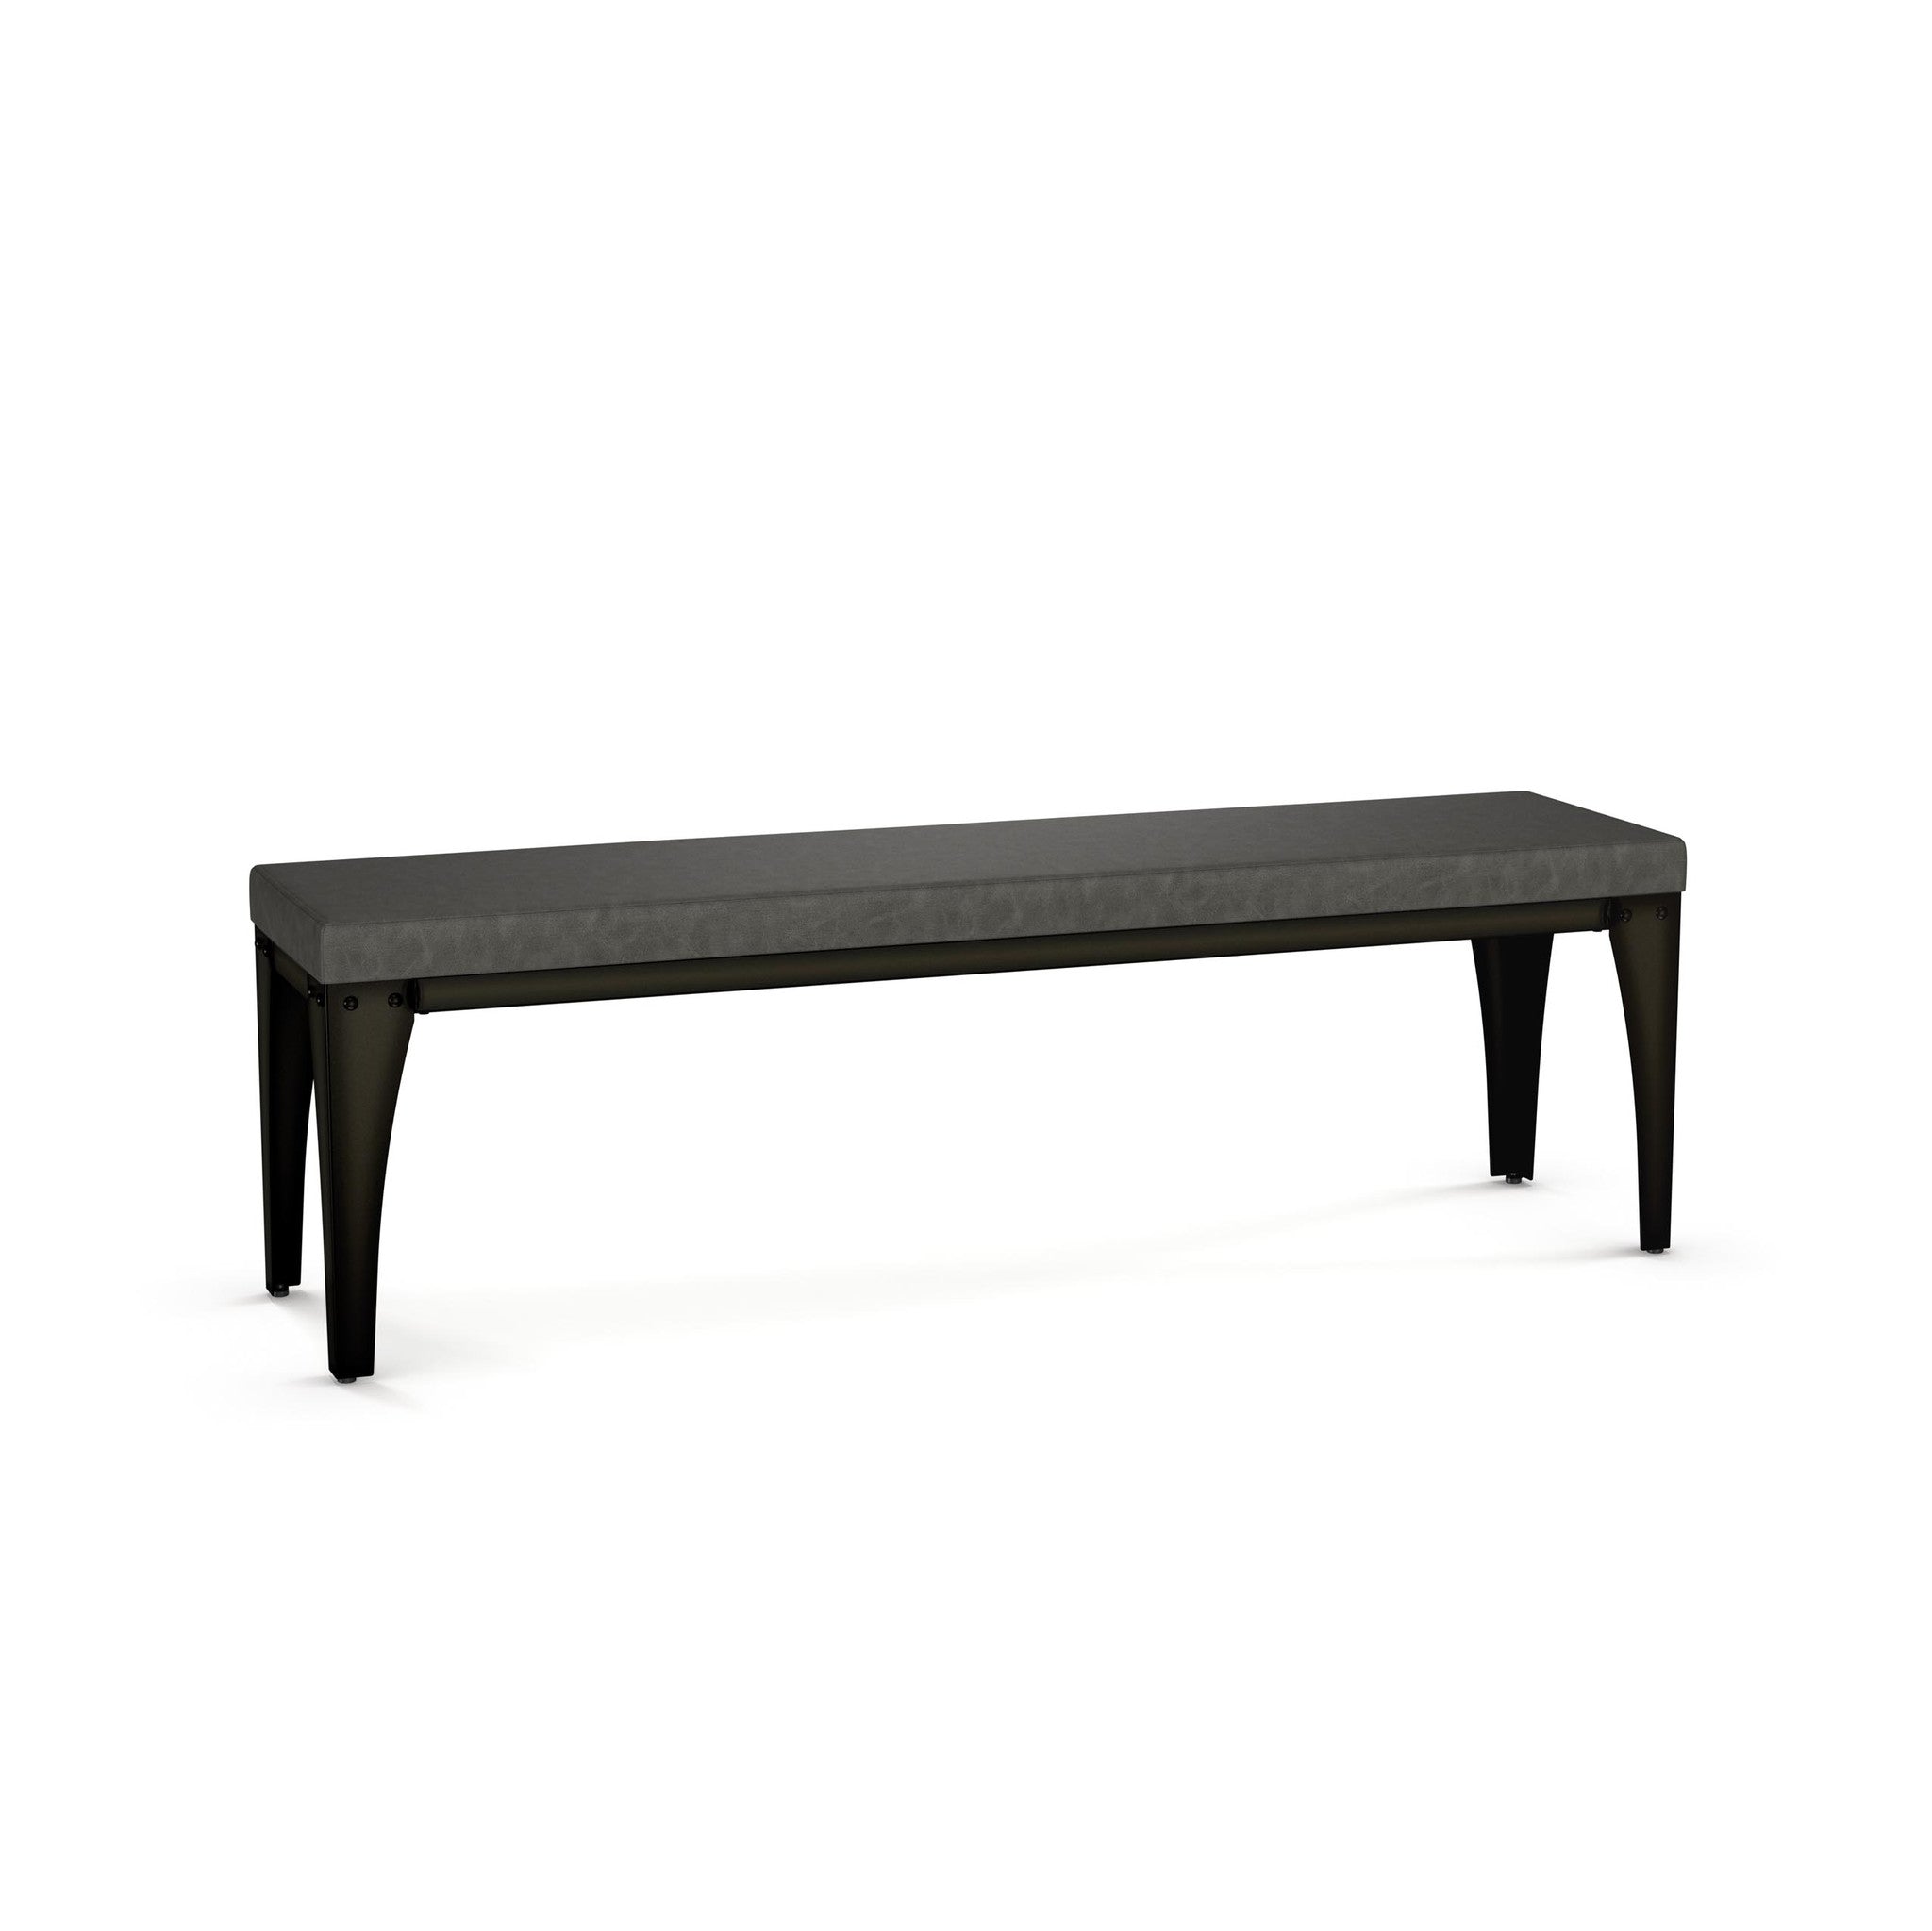 Picture of Upright Bench - 60" - Charcoal Fabric